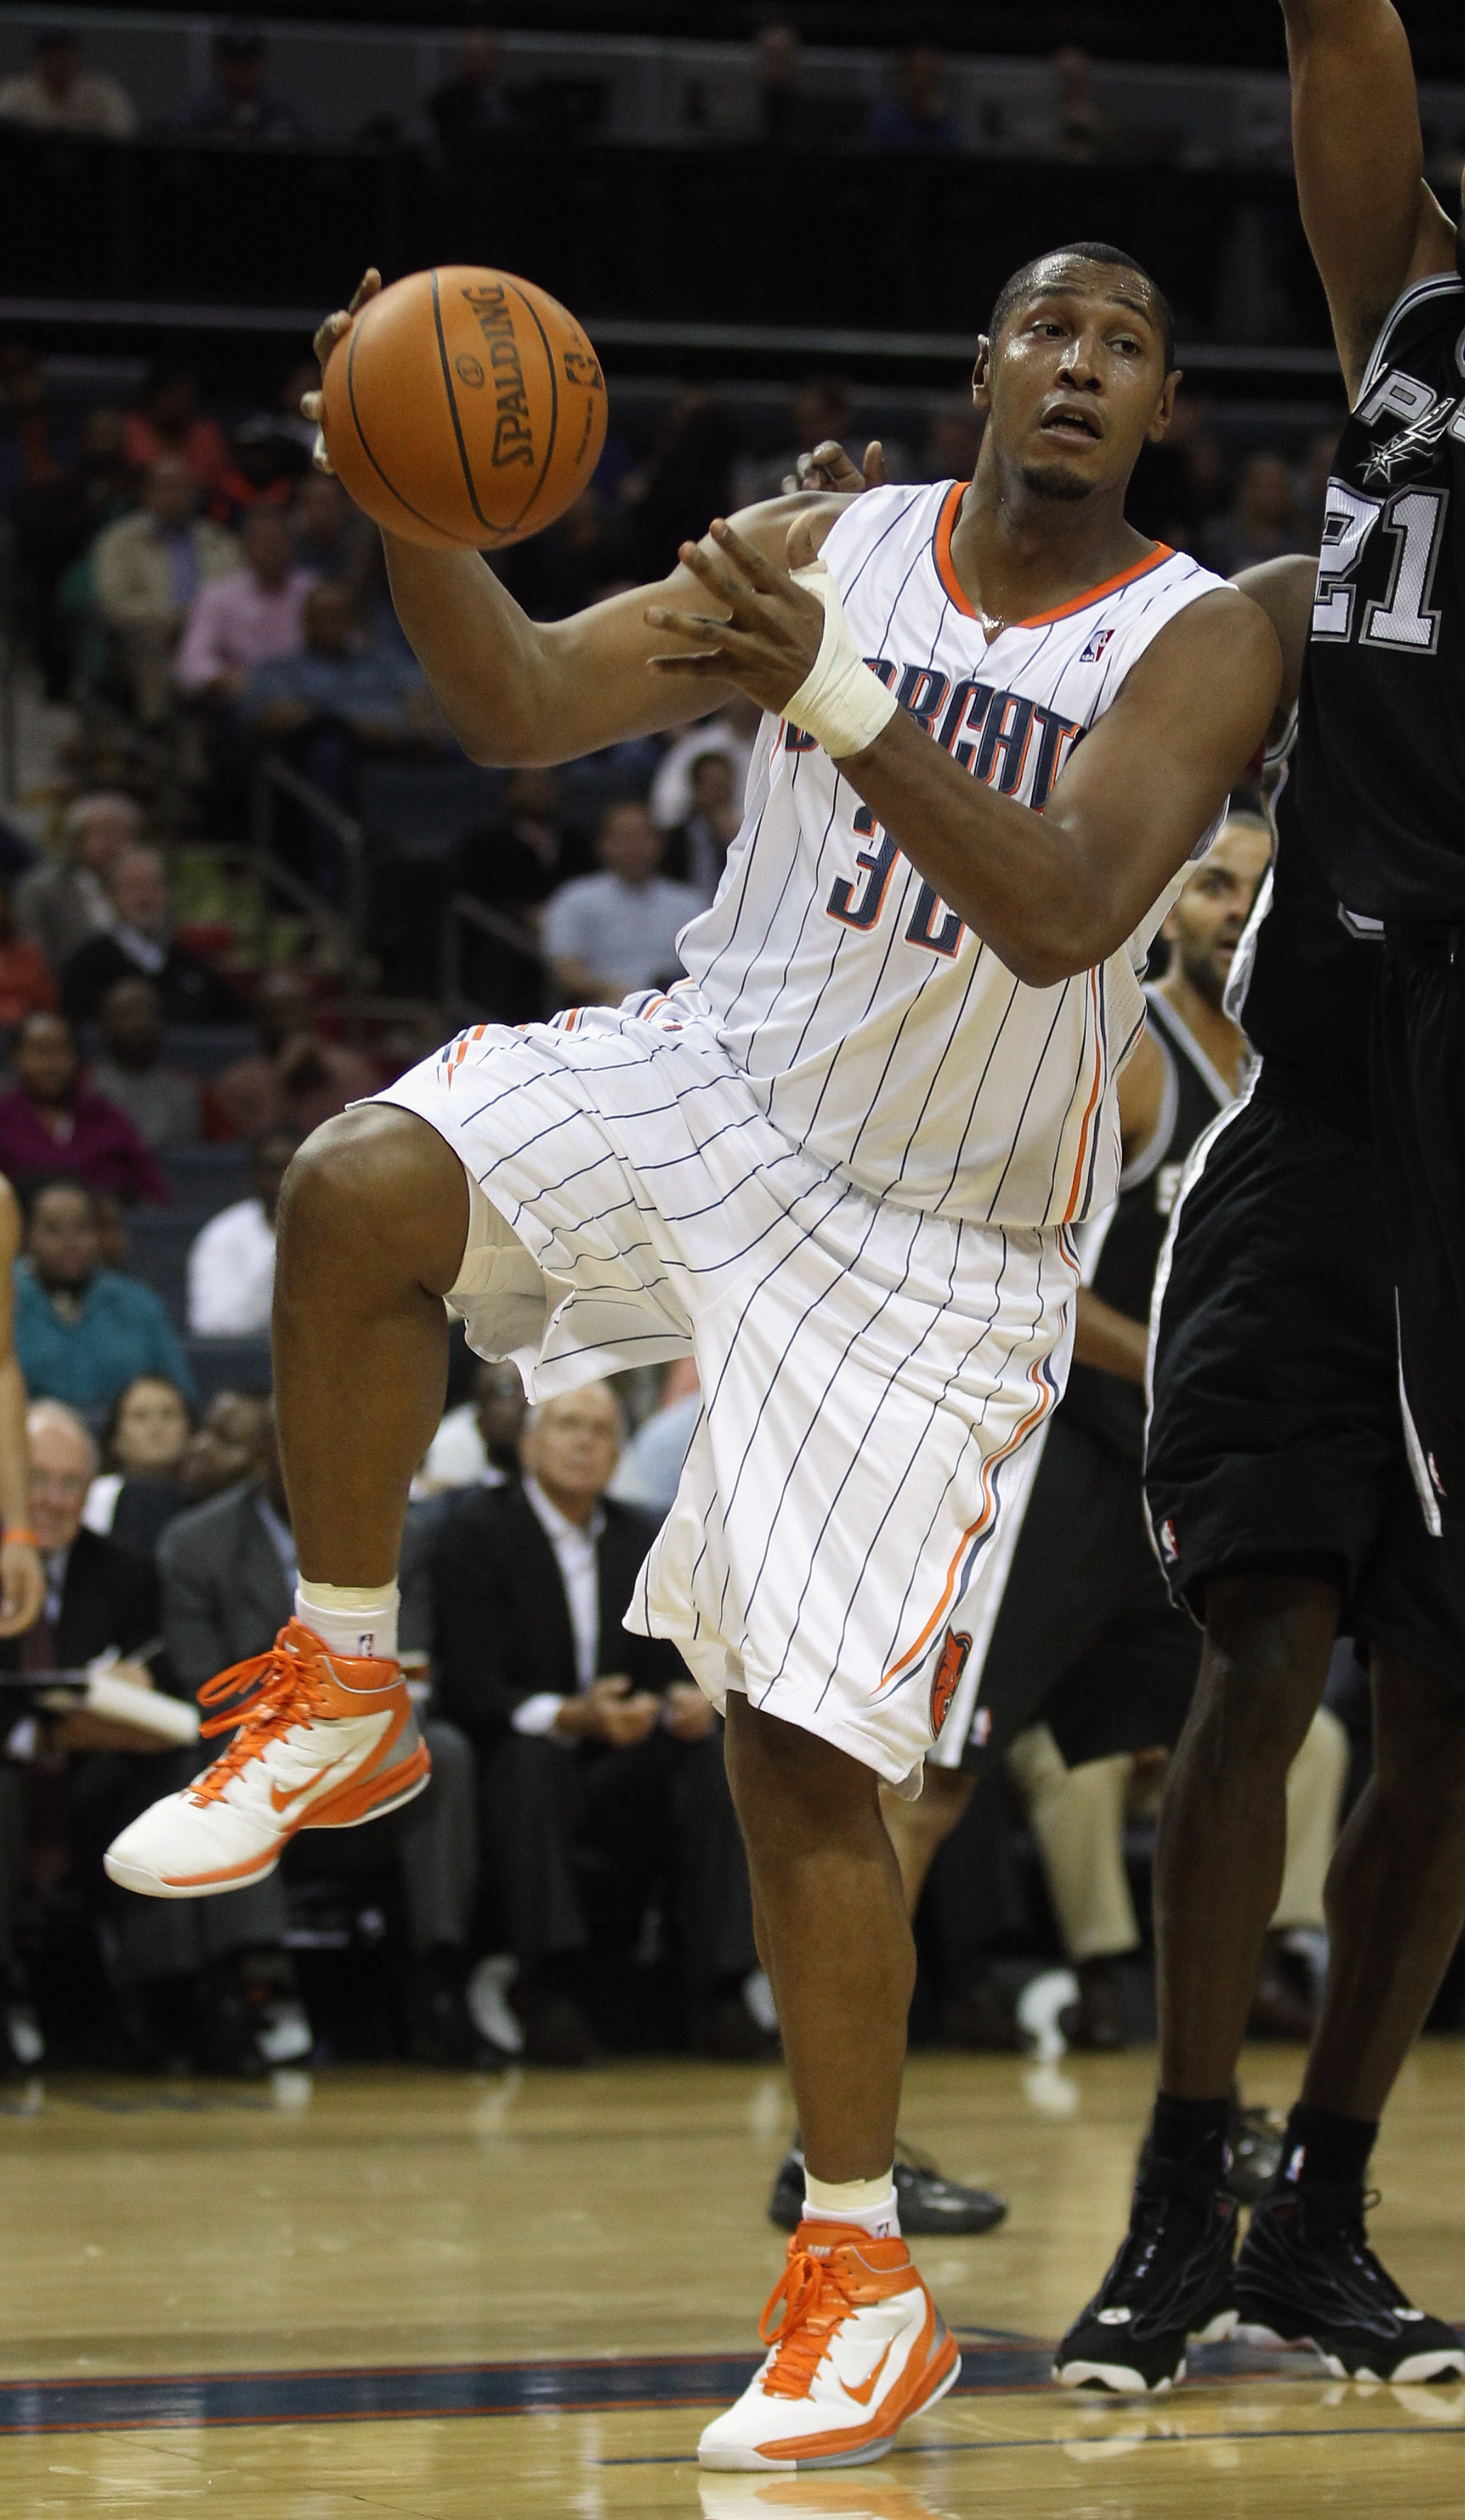 CHARLOTTE, NC - NOVEMBER 08:  Boris Diaw #32 of the Charlotte Bobcats against the San Antonio Spurs during their game at Time Warner Cable Arena on November 8, 2010 in Charlotte, North Carolina.  NOTE TO USER: User expressly acknowledges and agrees that,